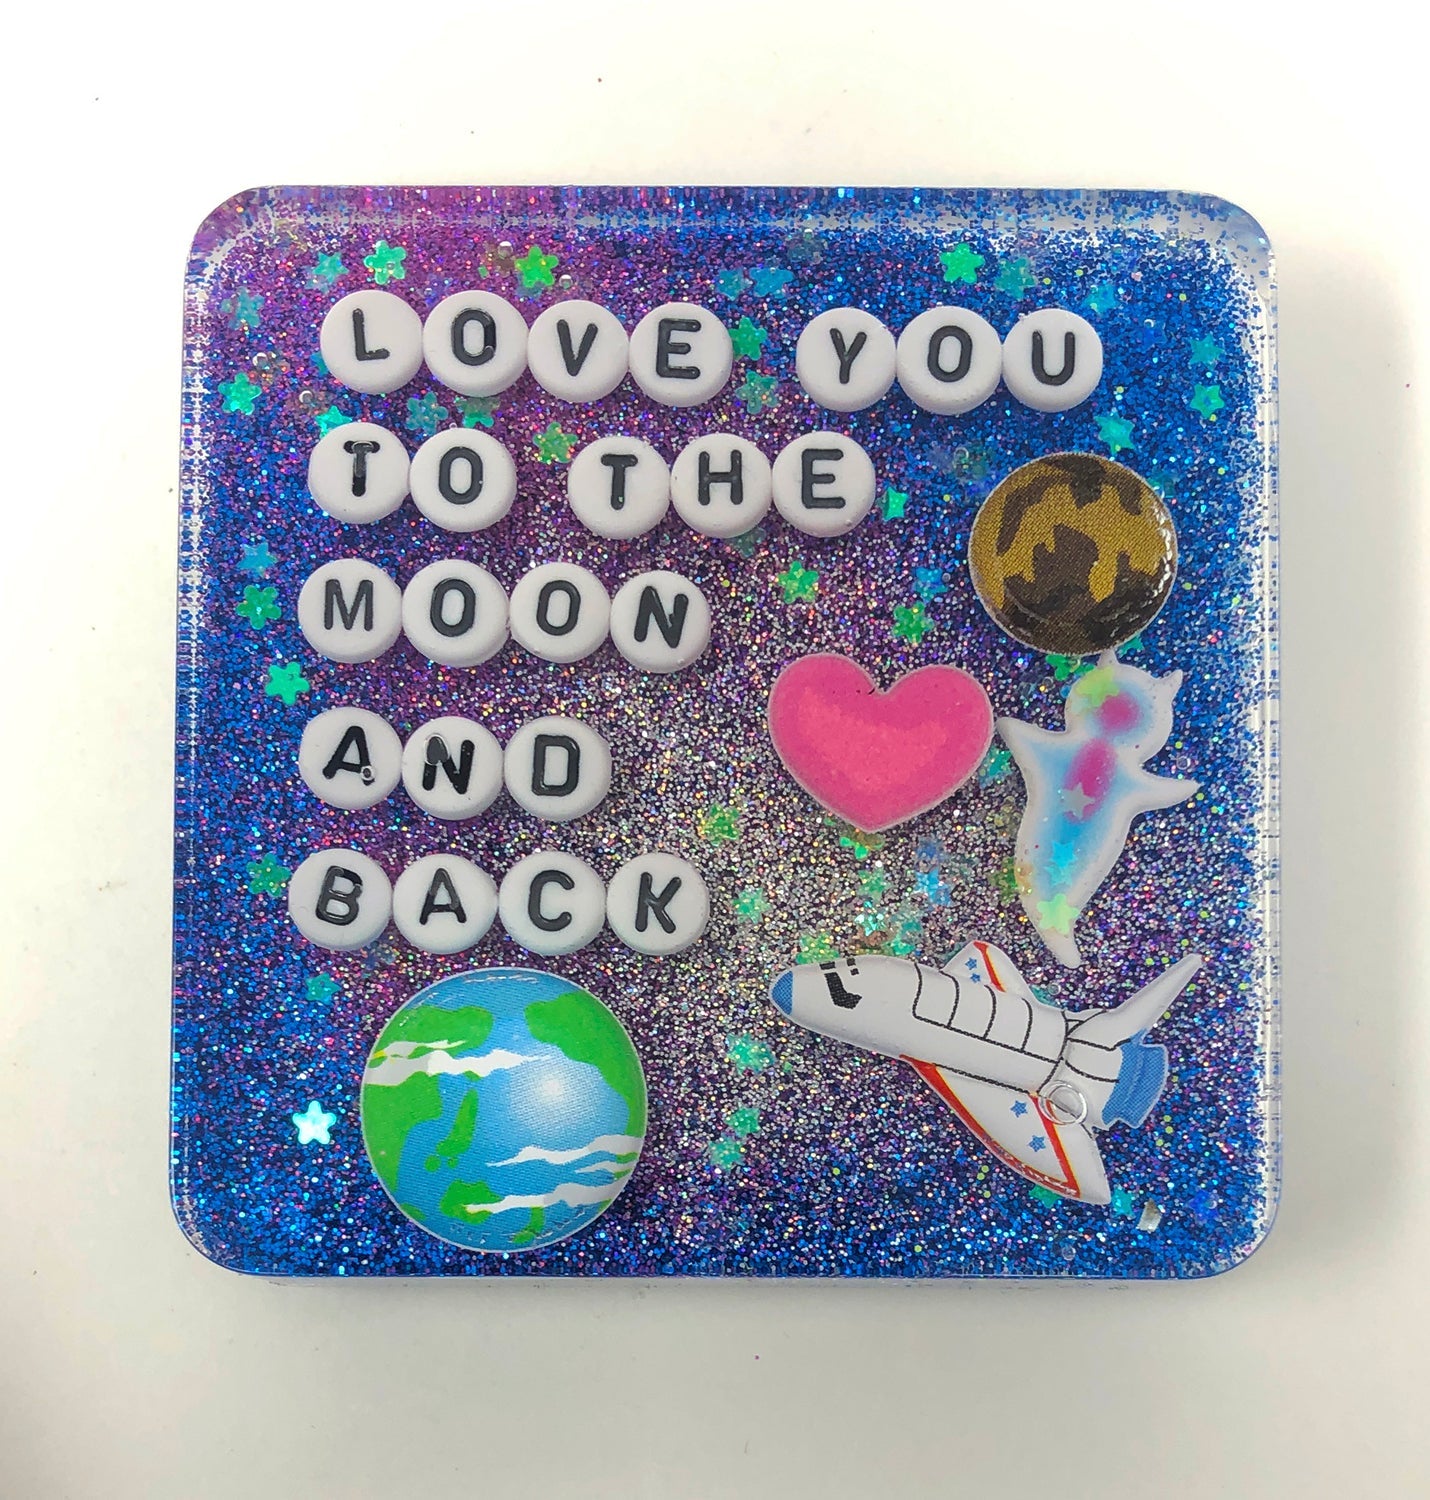 Love You To The Moon And Back - Shower Art - READY TO SHIP